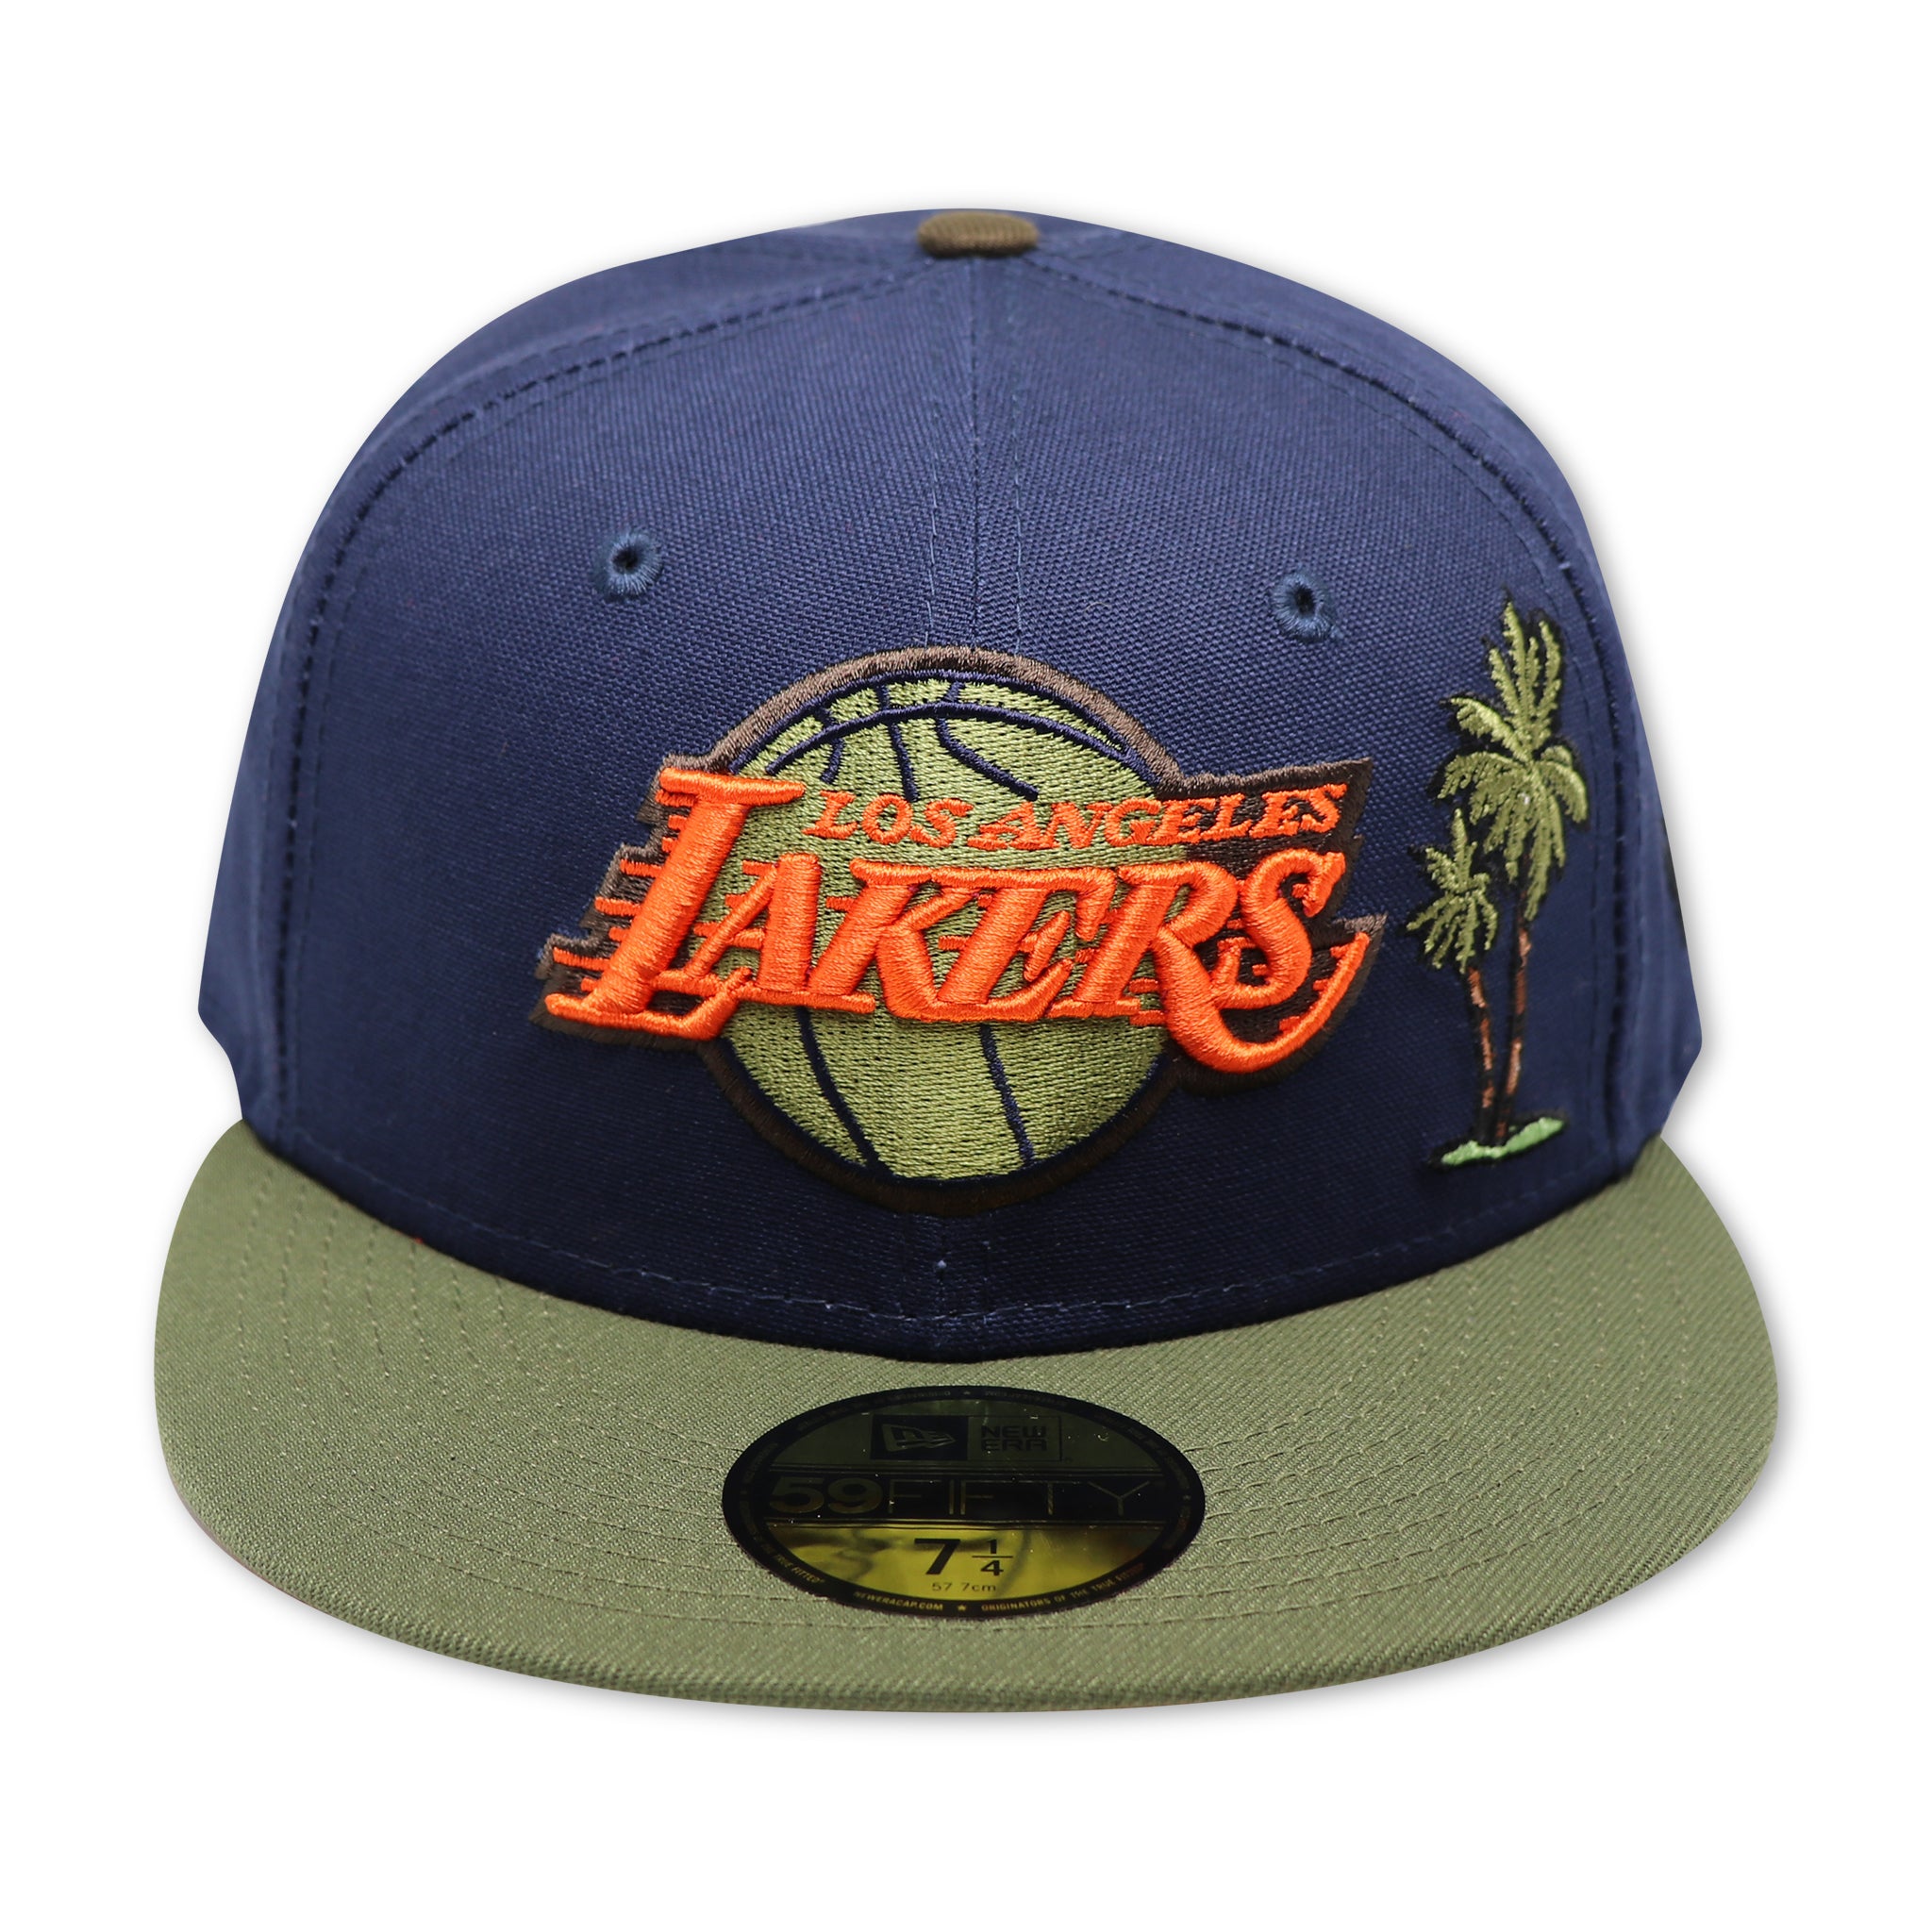 LOS ANGELES LAKERS (PALM TREE) NEWERA 59FIFTY FITTED (ORANGE UNDER VISOR)